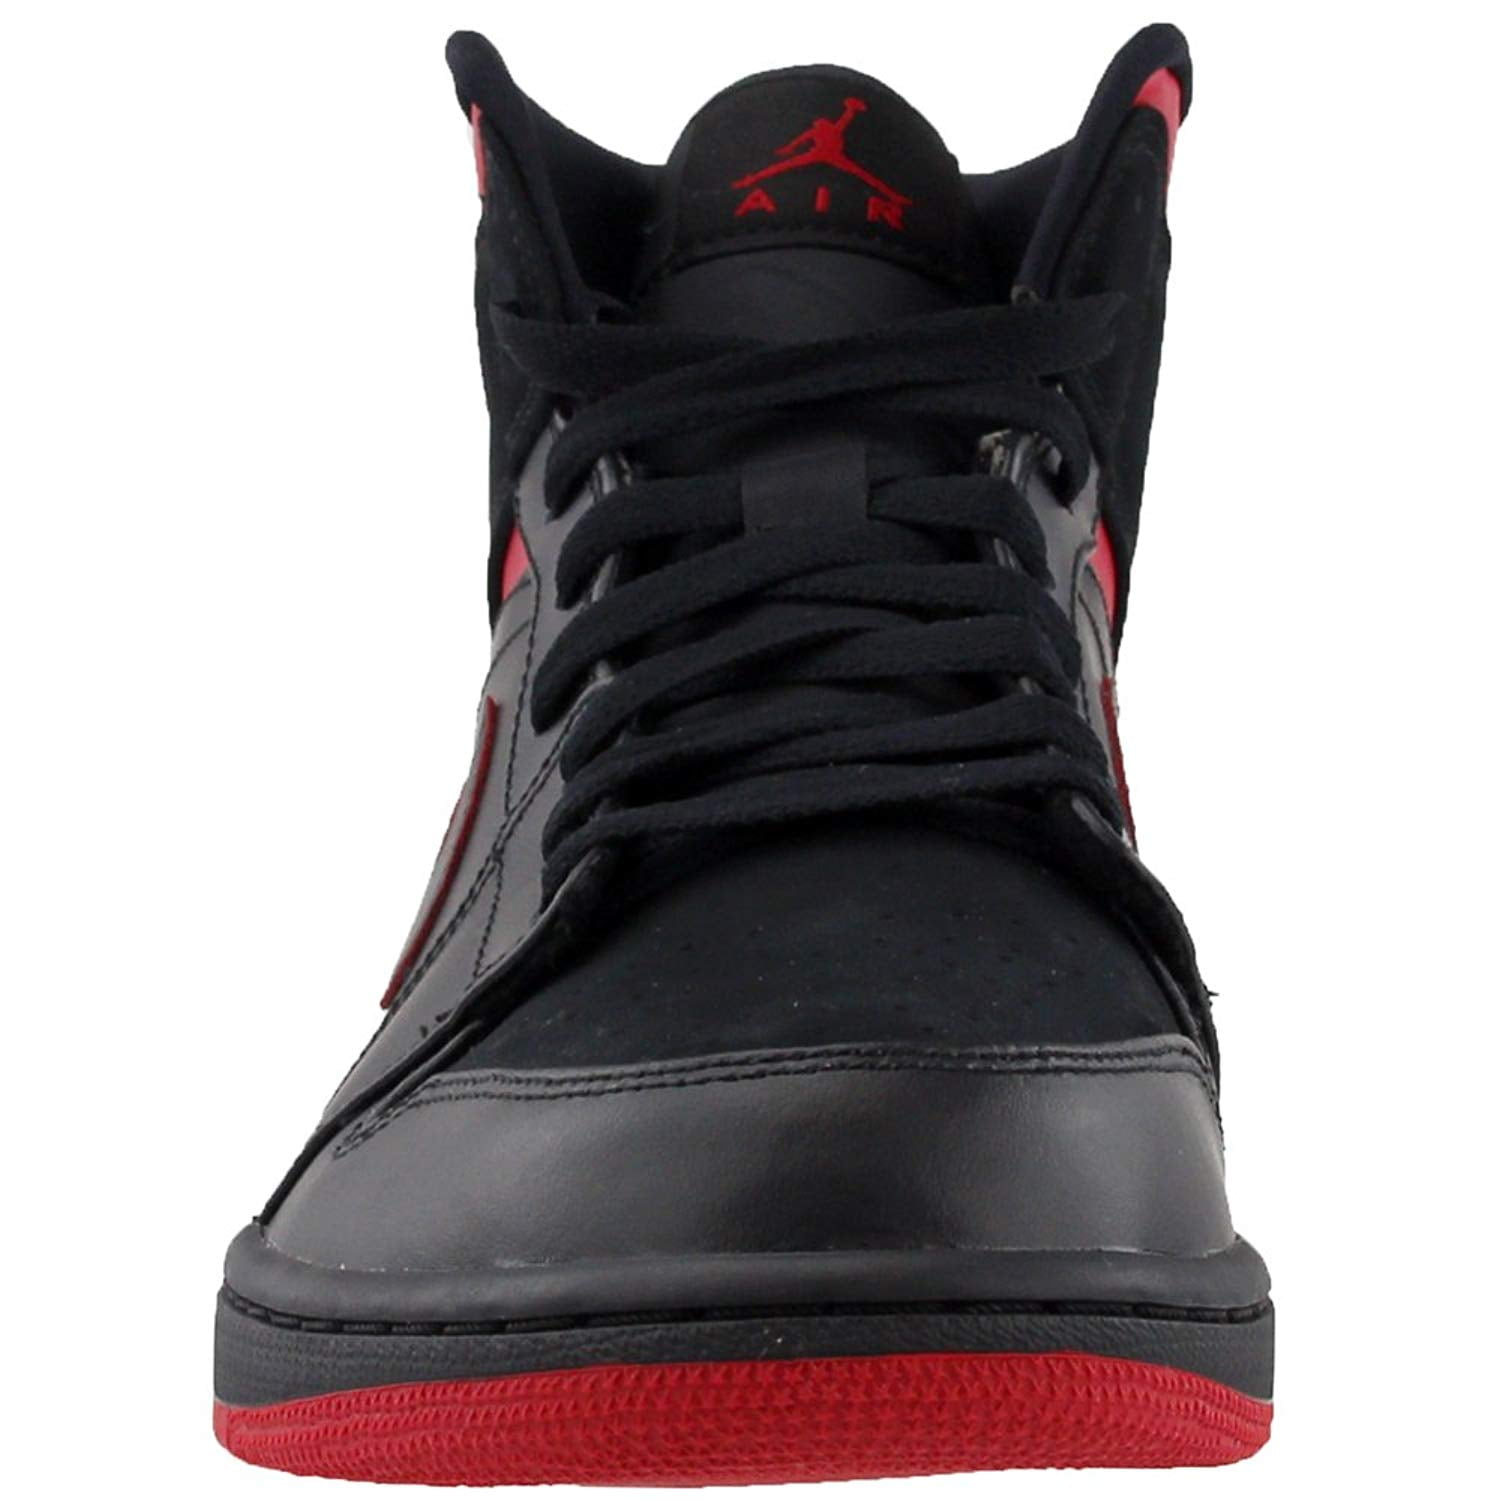 all black jordans with red bottoms